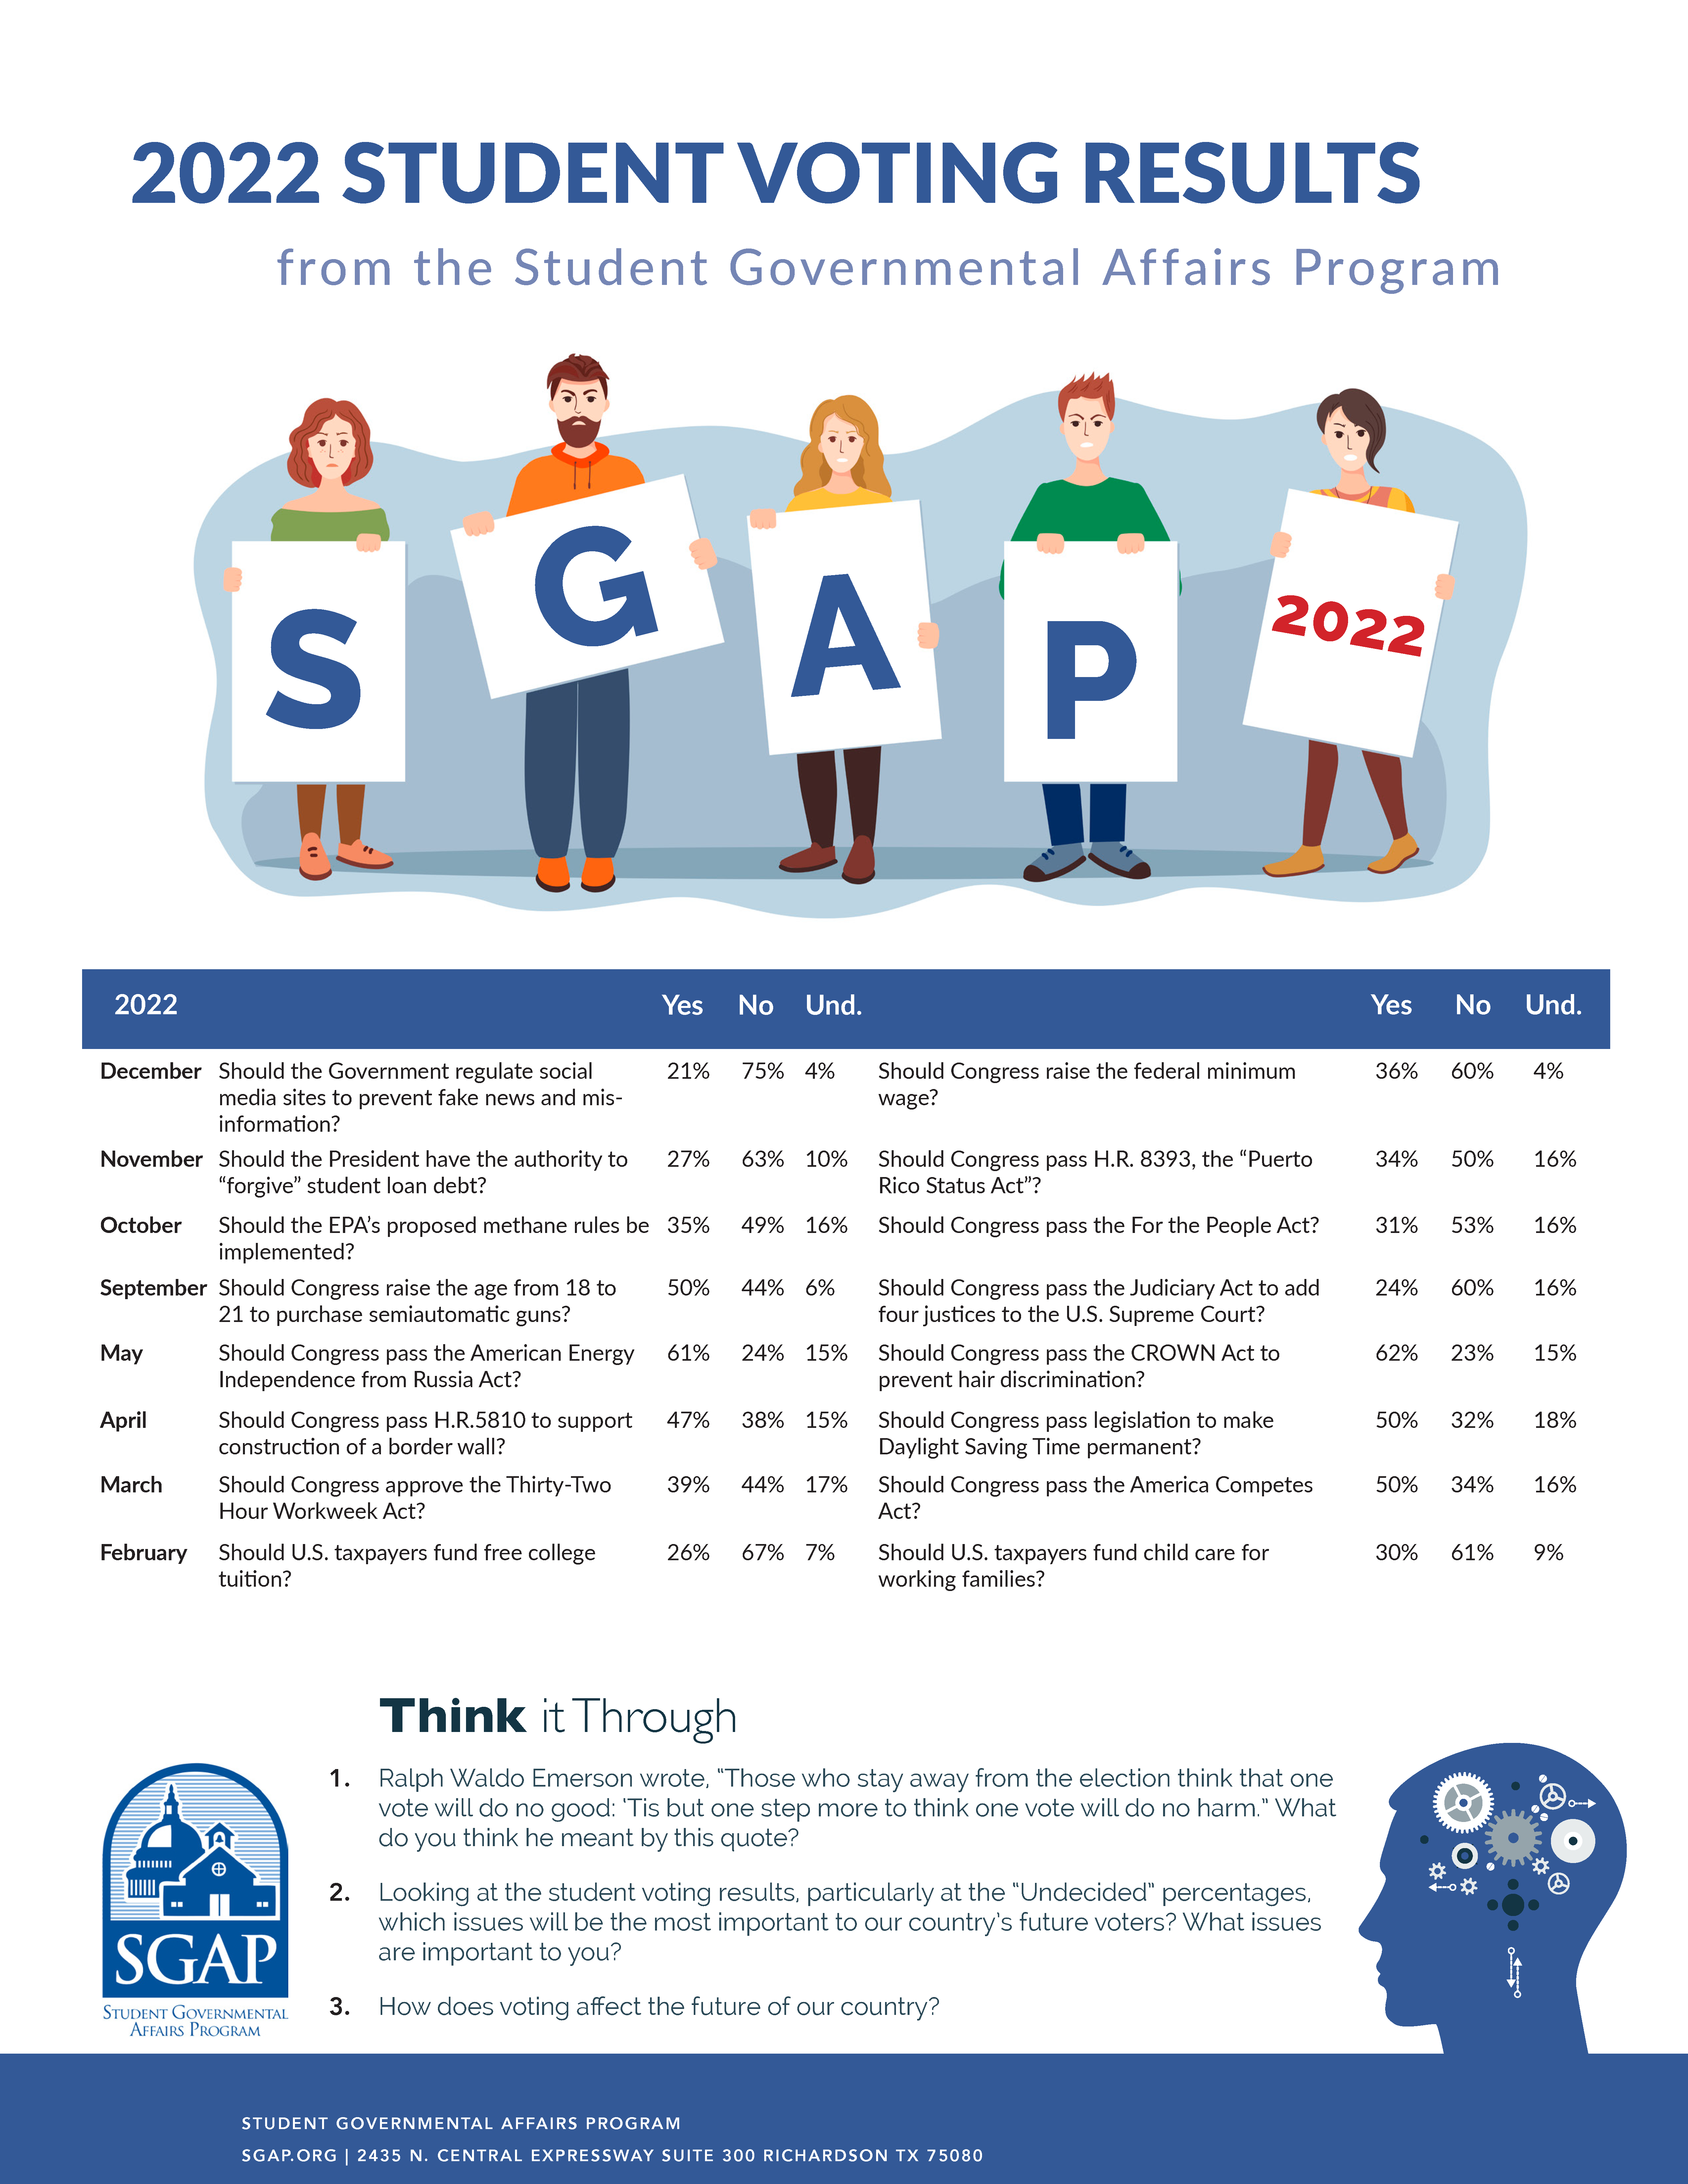 2022 SGAP Student Voting Results Infographic